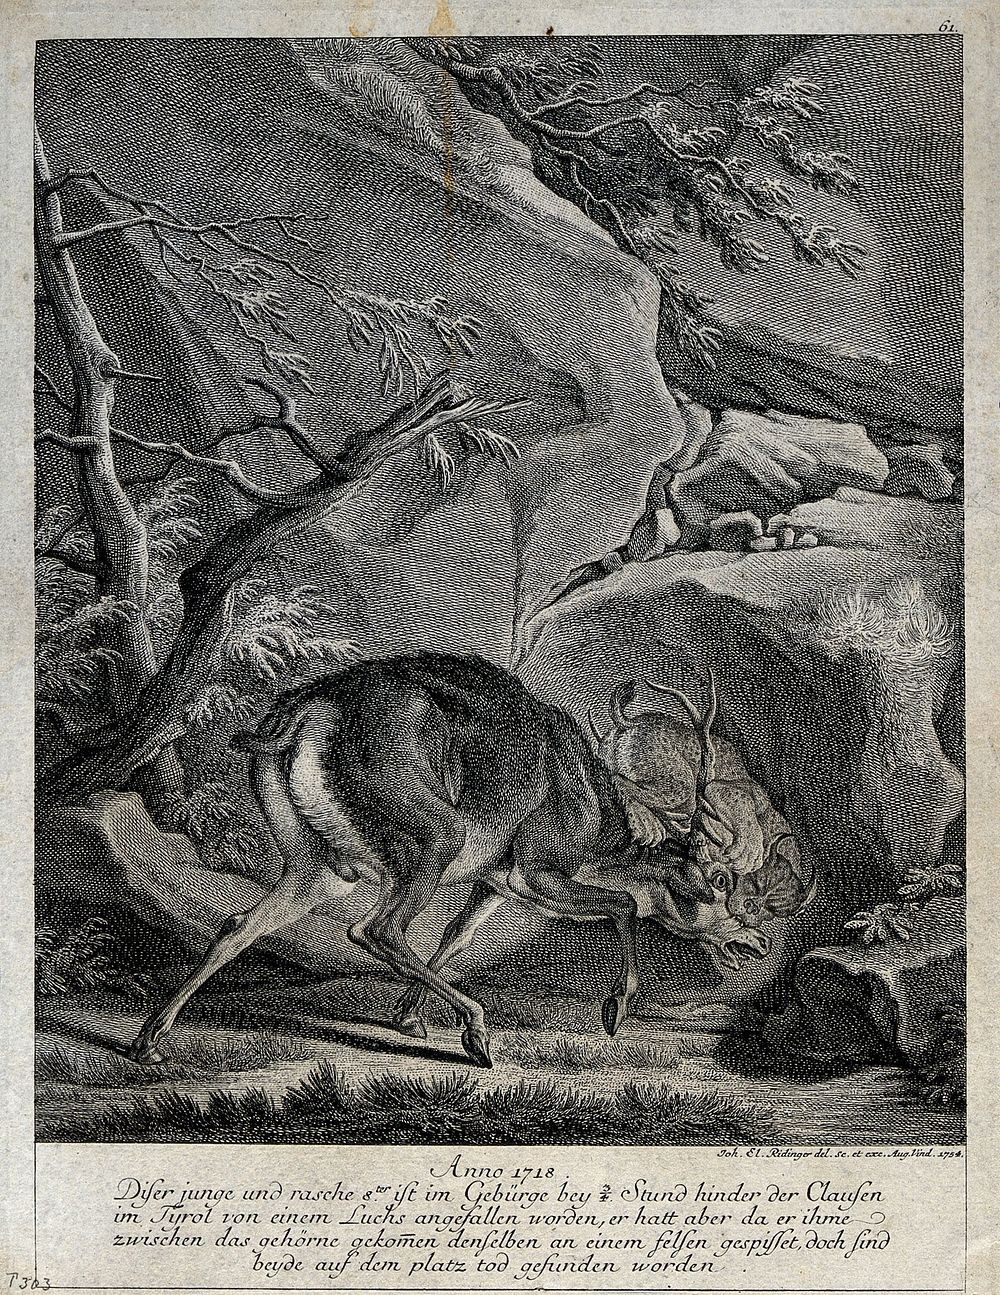 A fight between a young stag and a lynx in which both die. Etching by J.E. Ridinger.